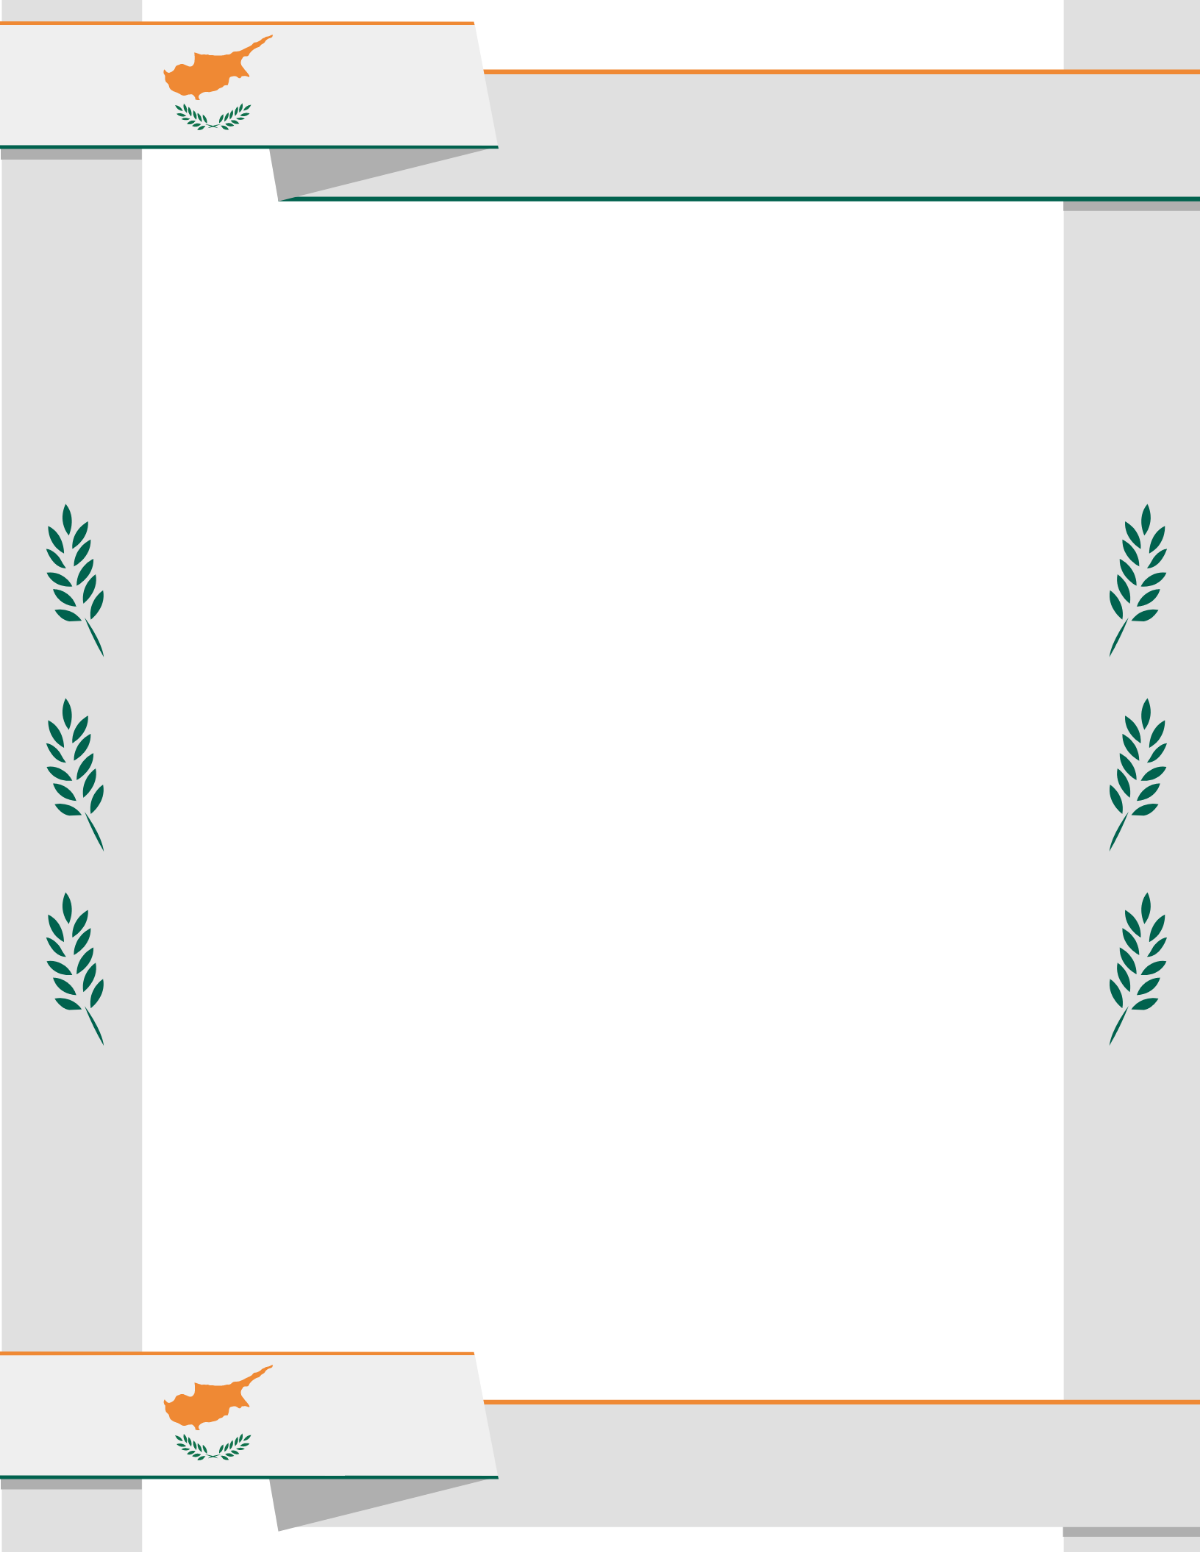 Cyprus National Day Border Template